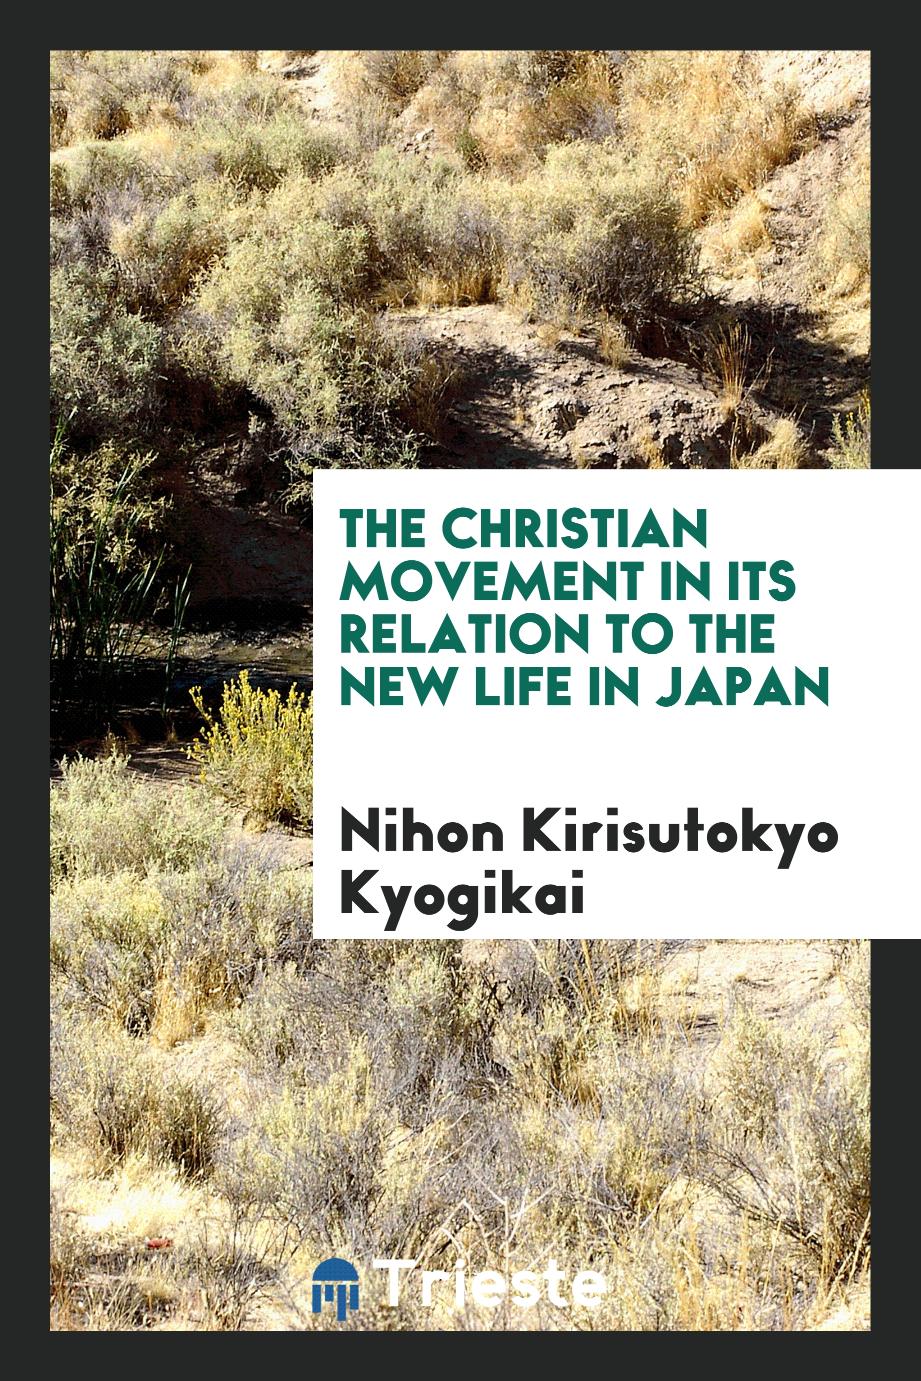 The Christian movement in its relation to the new life in Japan